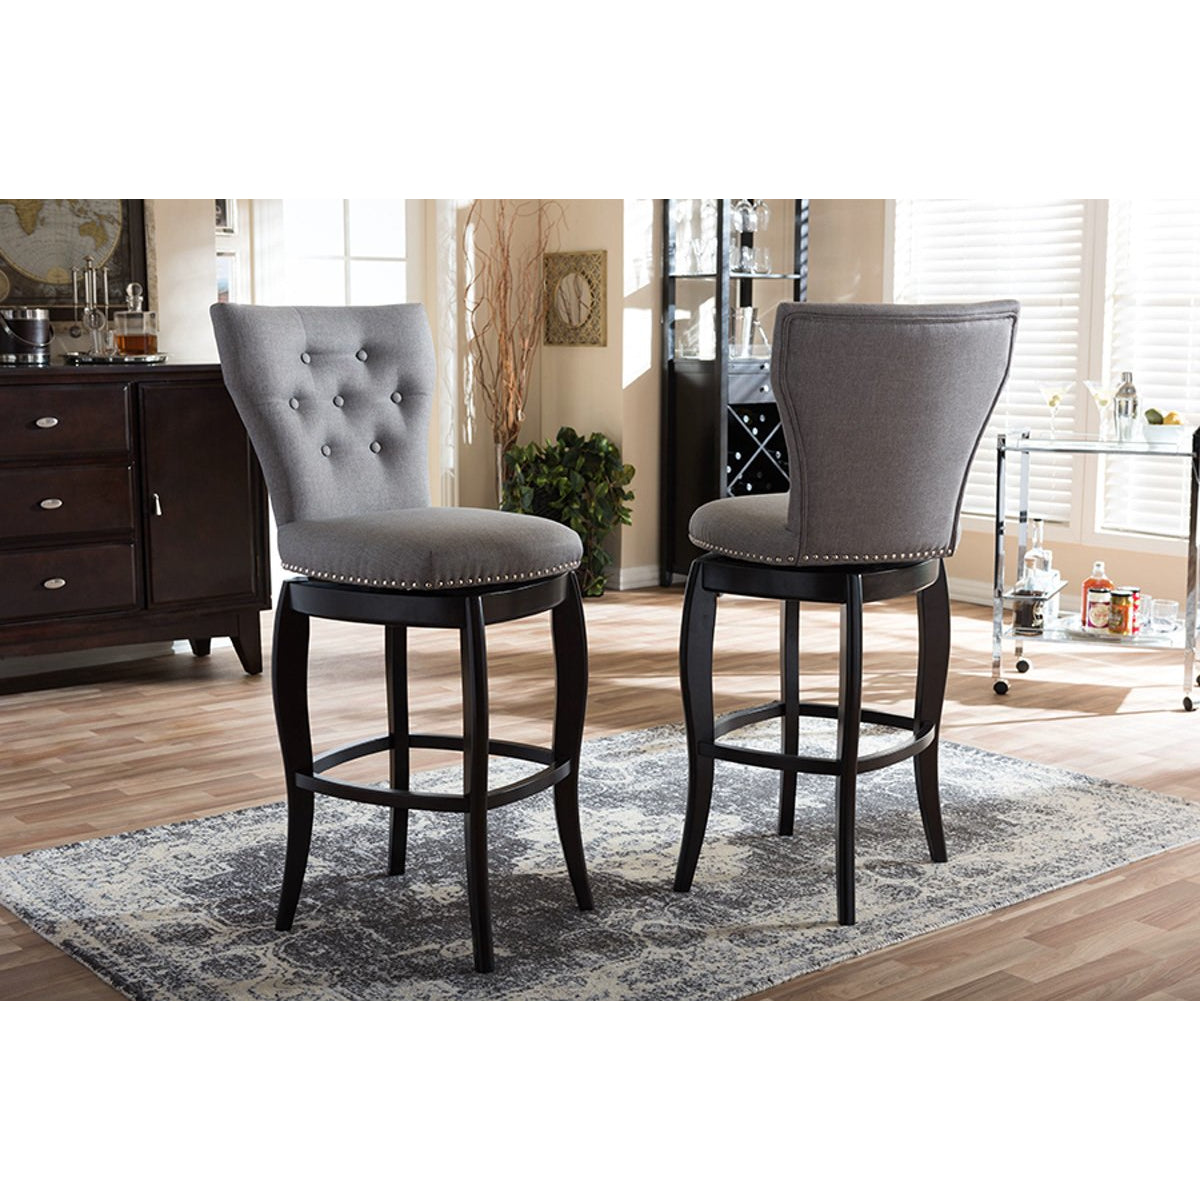 Baxton Studio Leonice Modern and Contemporary Grey Fabric Upholstered Button-tufted 29-Inch Swivel Bar Stool (Set of 2) Baxton Studio-Bar Stools-Minimal And Modern - 5